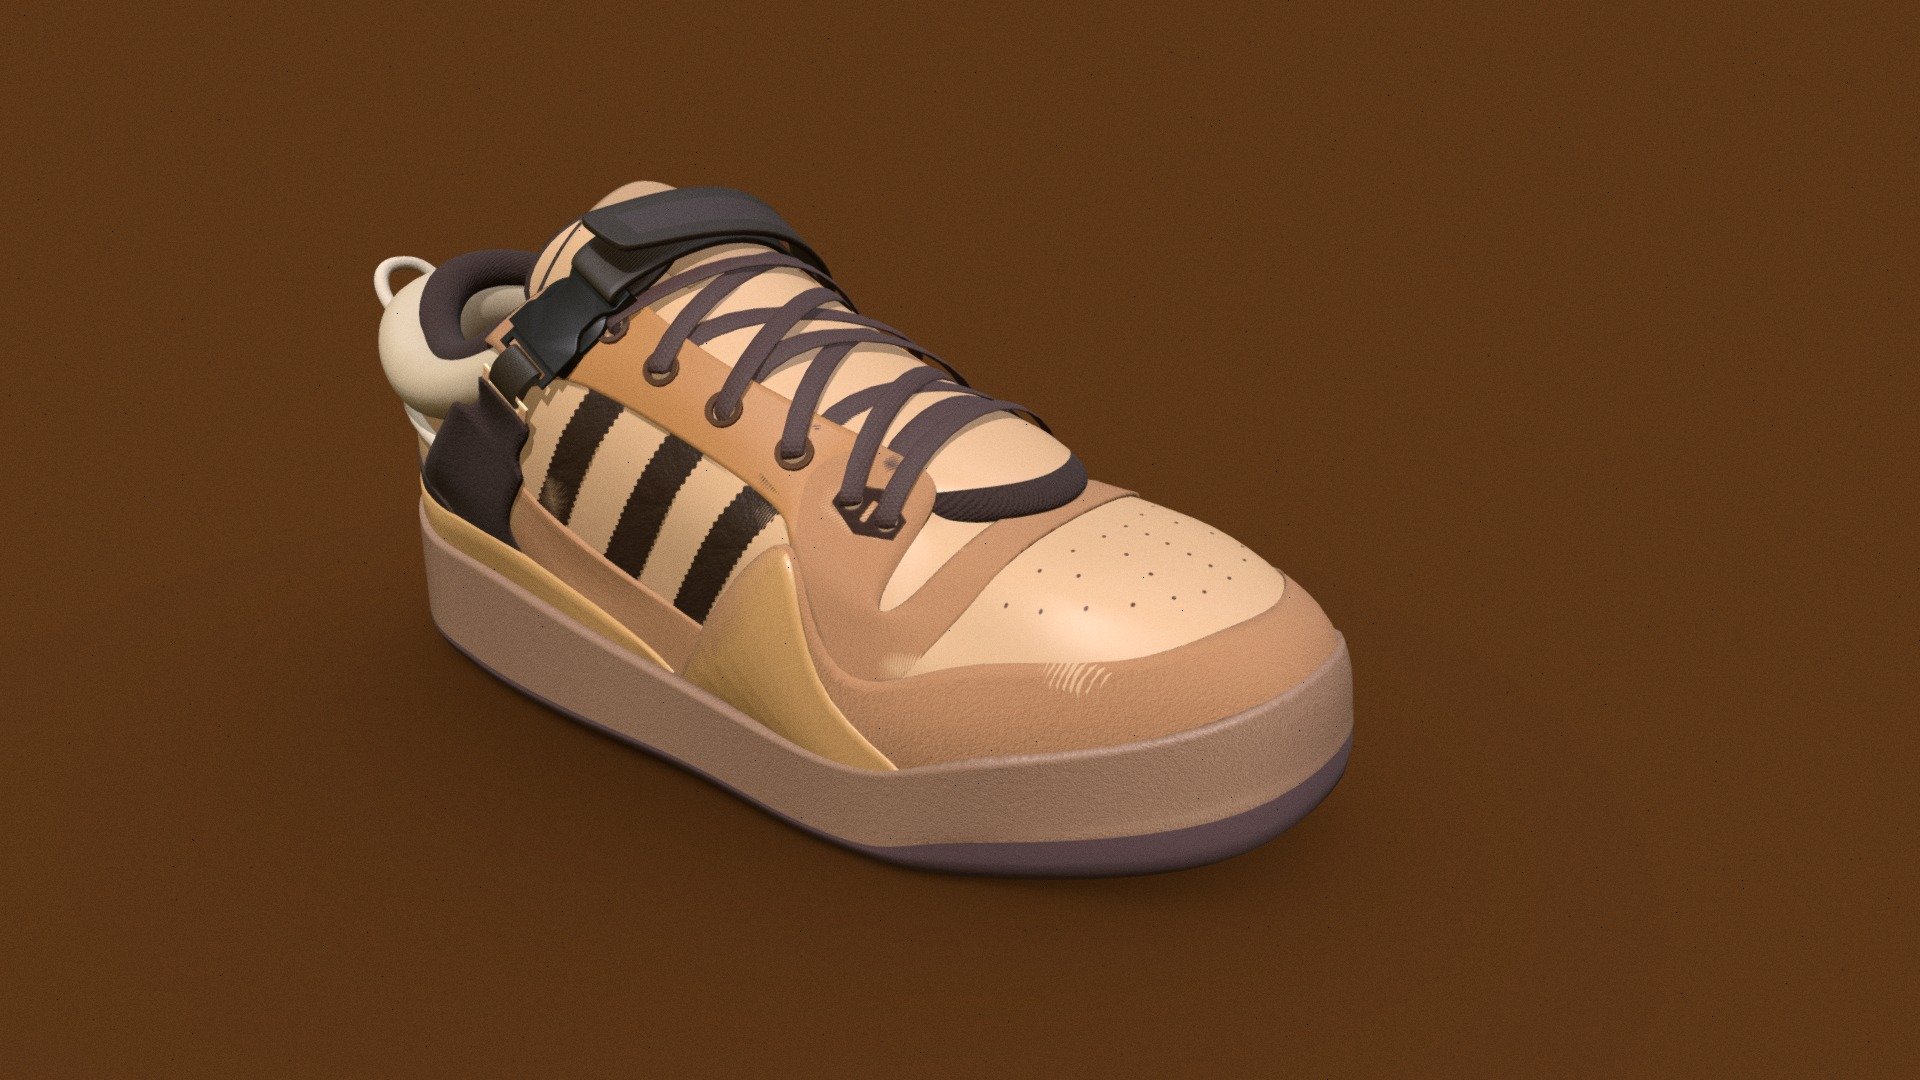 I made the Bad Bunny Shoes and I share them because I thought they could be useful for someone. It’s my first time modeling shoes so they’re not perfect. 
IG: https://www.instagram.com/camiloohh/ - Adidas Bad Bunny Coffee Shoes Free - Download Free 3D model by camilooh 3d model